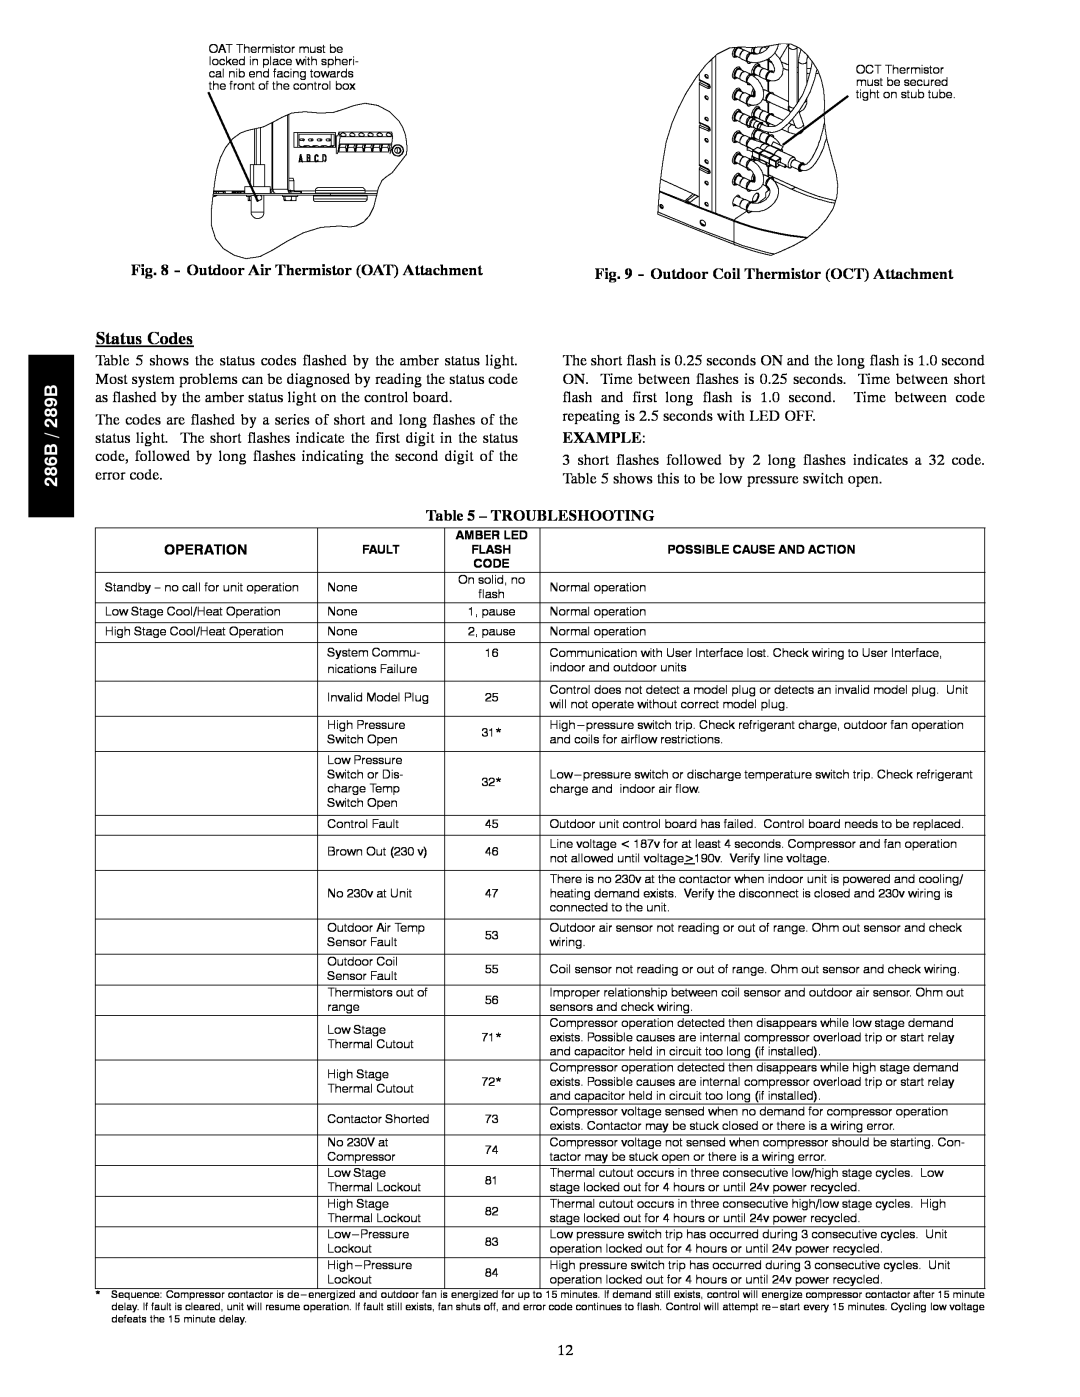 Bryant installation instructions Status Codes, Outdoor Air Thermistor OAT Attachment, Troubleshooting, 286B / 289B 